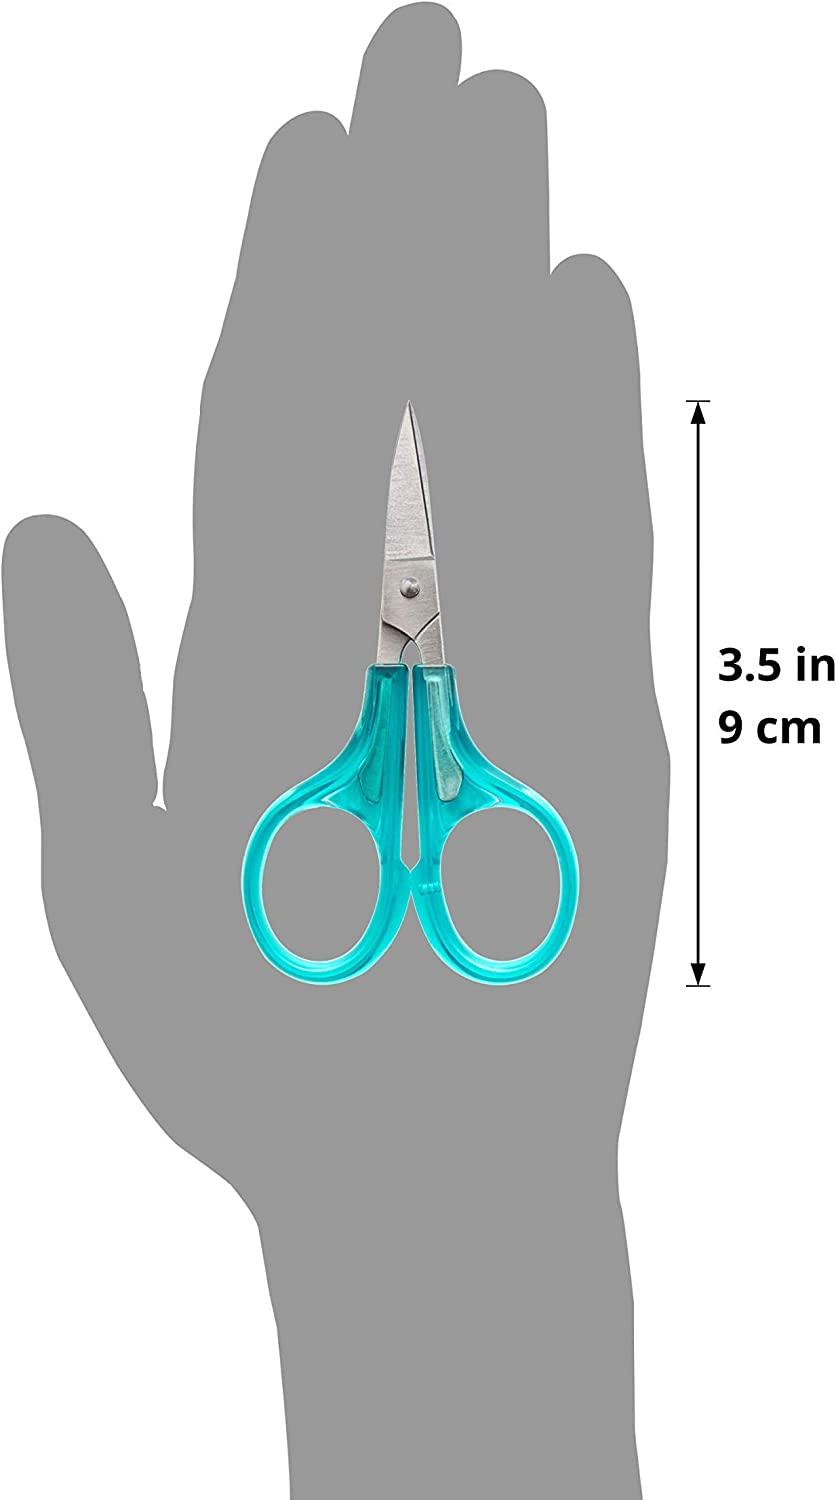 Beaditive Sewing and Embroidery Scissors Set (2 Pc.) Curved and Straight, Sharp, Stainless-Steel Design | Precision Tips, Ergonomic Rubber Handle